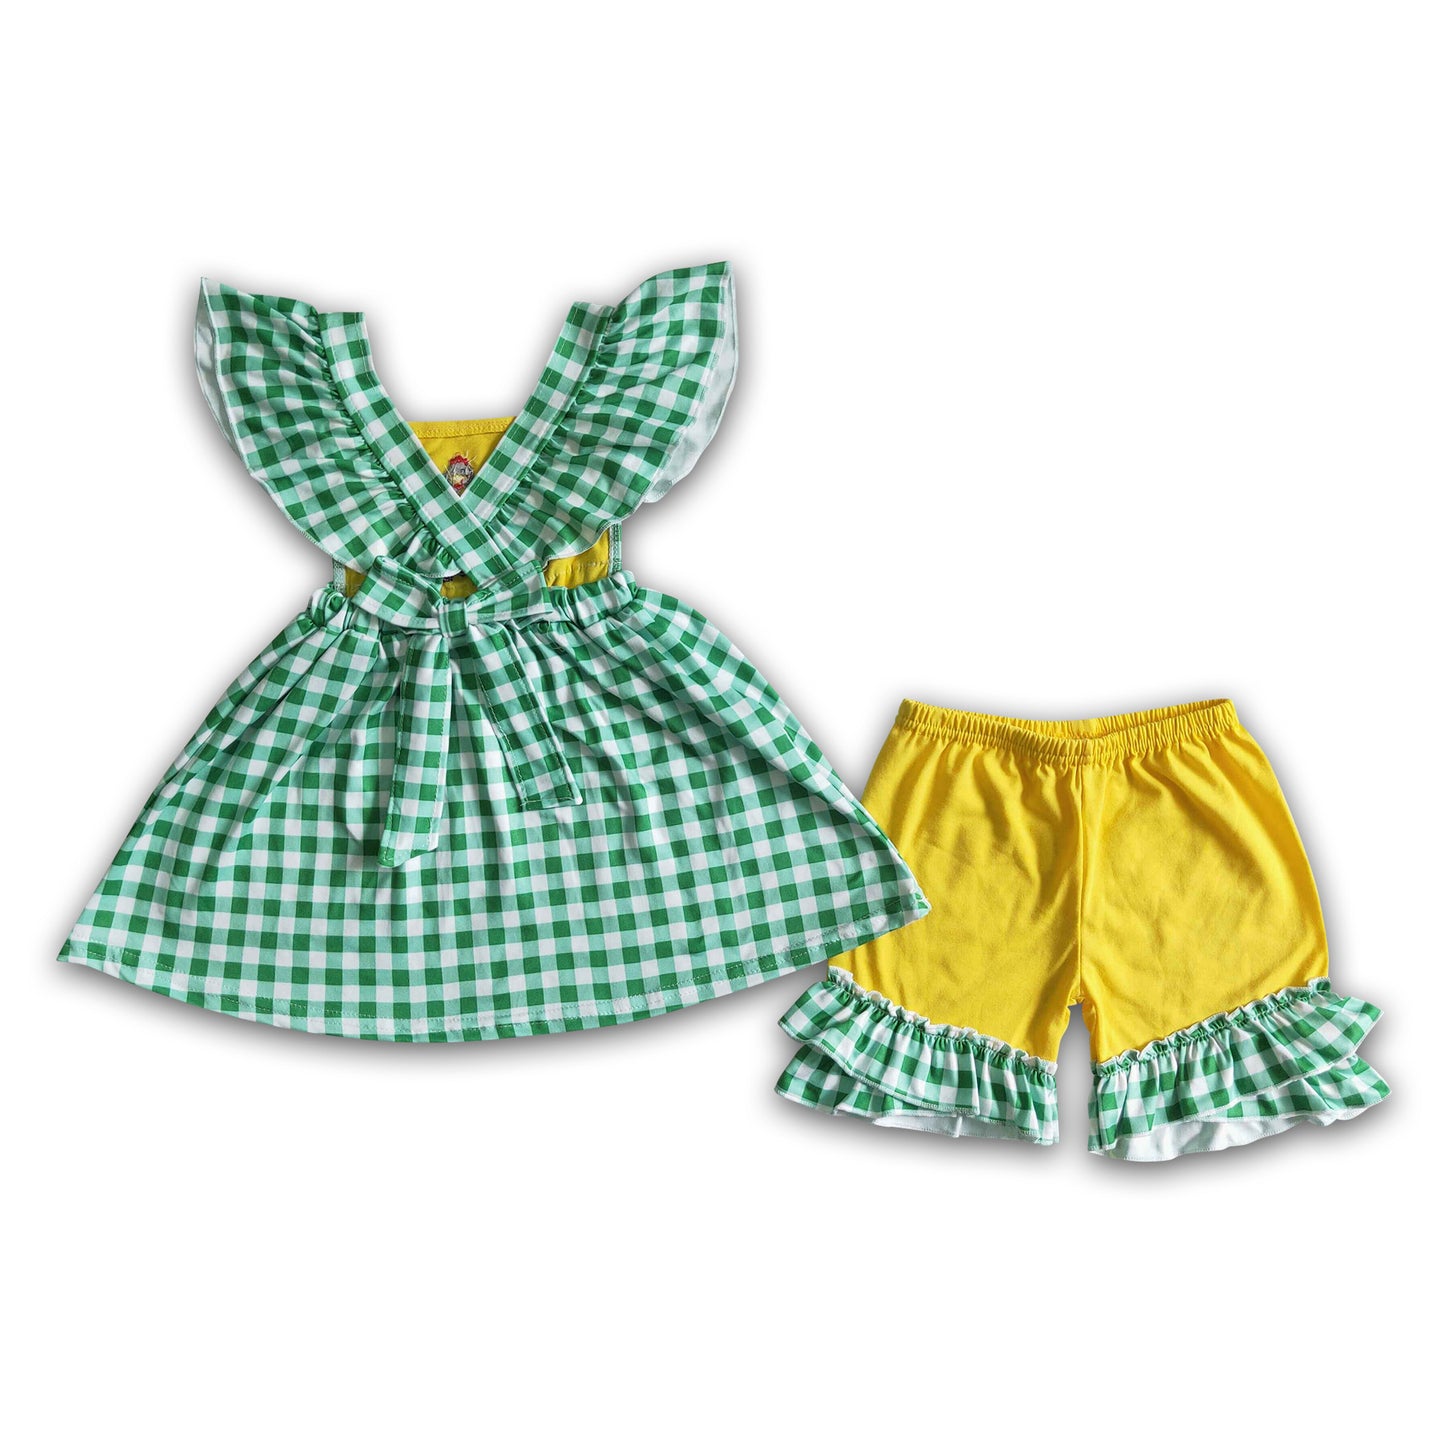 Chicken tractor embroidery girls farm clothing set